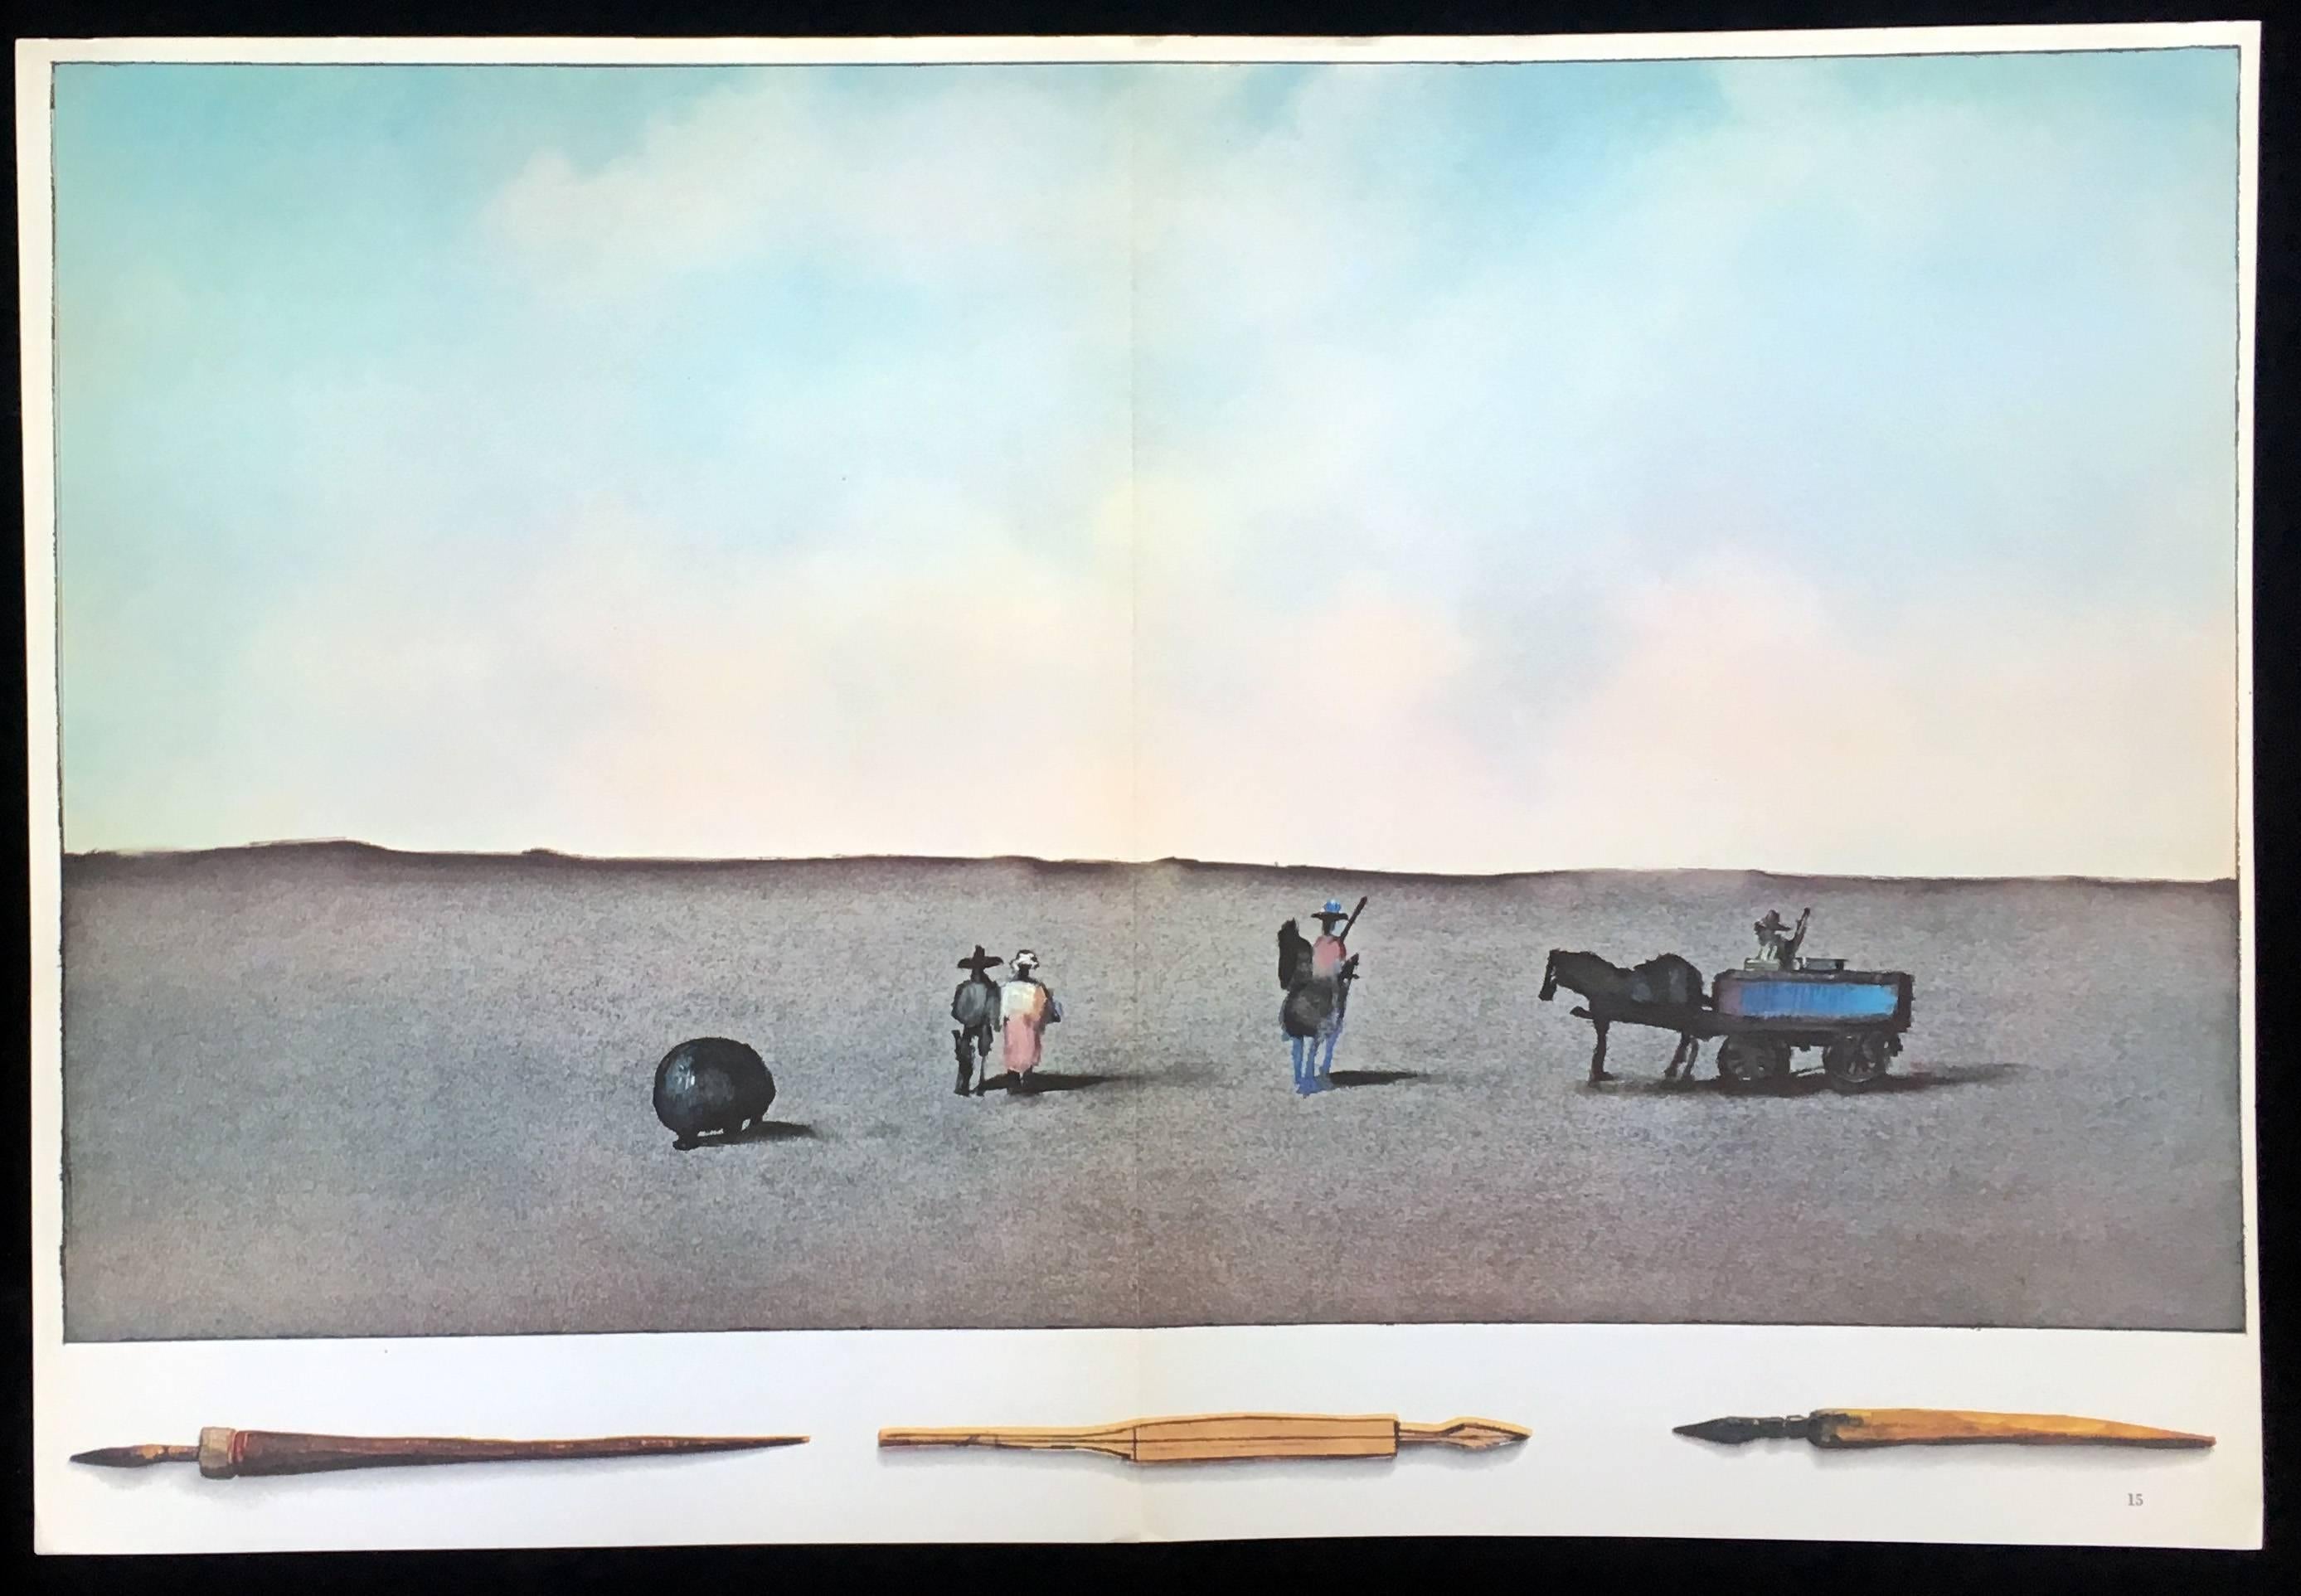 A striking Steinberg color work with surrealist-like overtones; published by Derriere Le Miroir 1973 

Off-set lithograph, 1973
22 x 15 inches
Fold-line in center as issued; very good to excellent condition 

Saul Steinberg (American b. 1914)